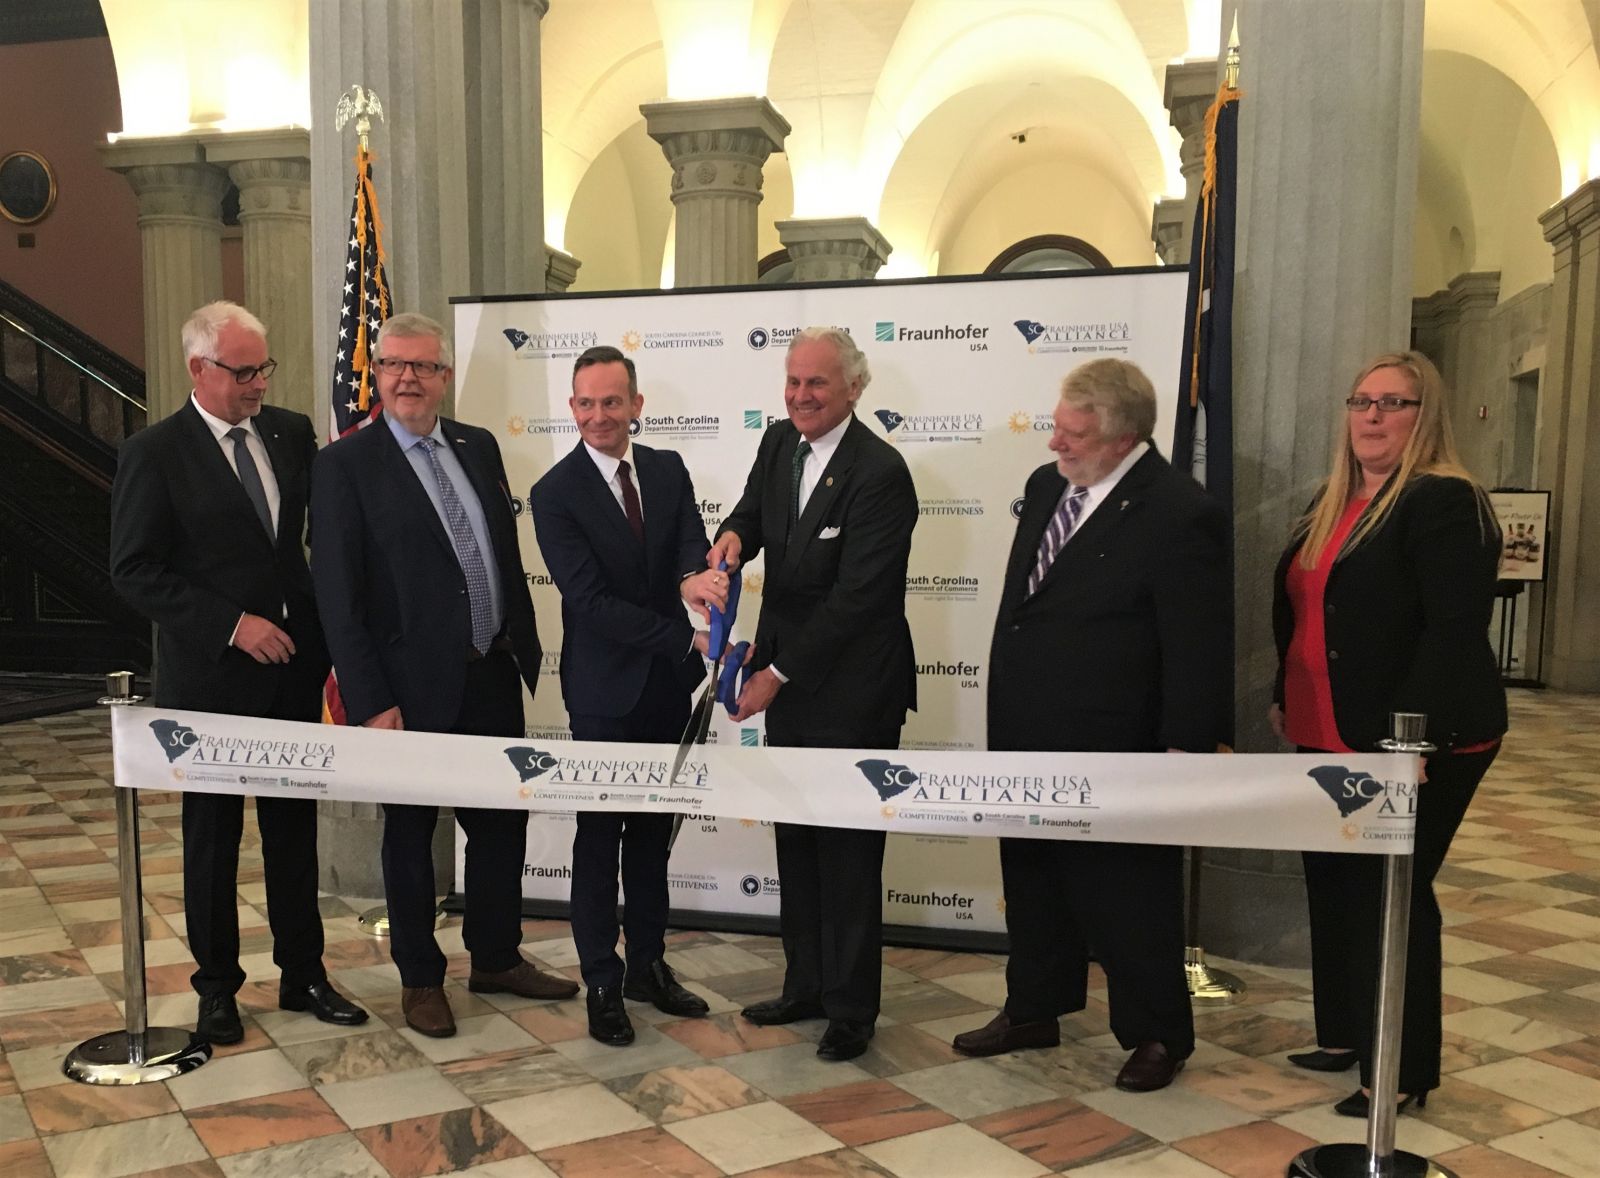 Gov. Henry McMaster cuts a ceremonial ribbon at the announcement of the S.C. Fraunhofer USA Alliance. (Photo/Renee Sexton)